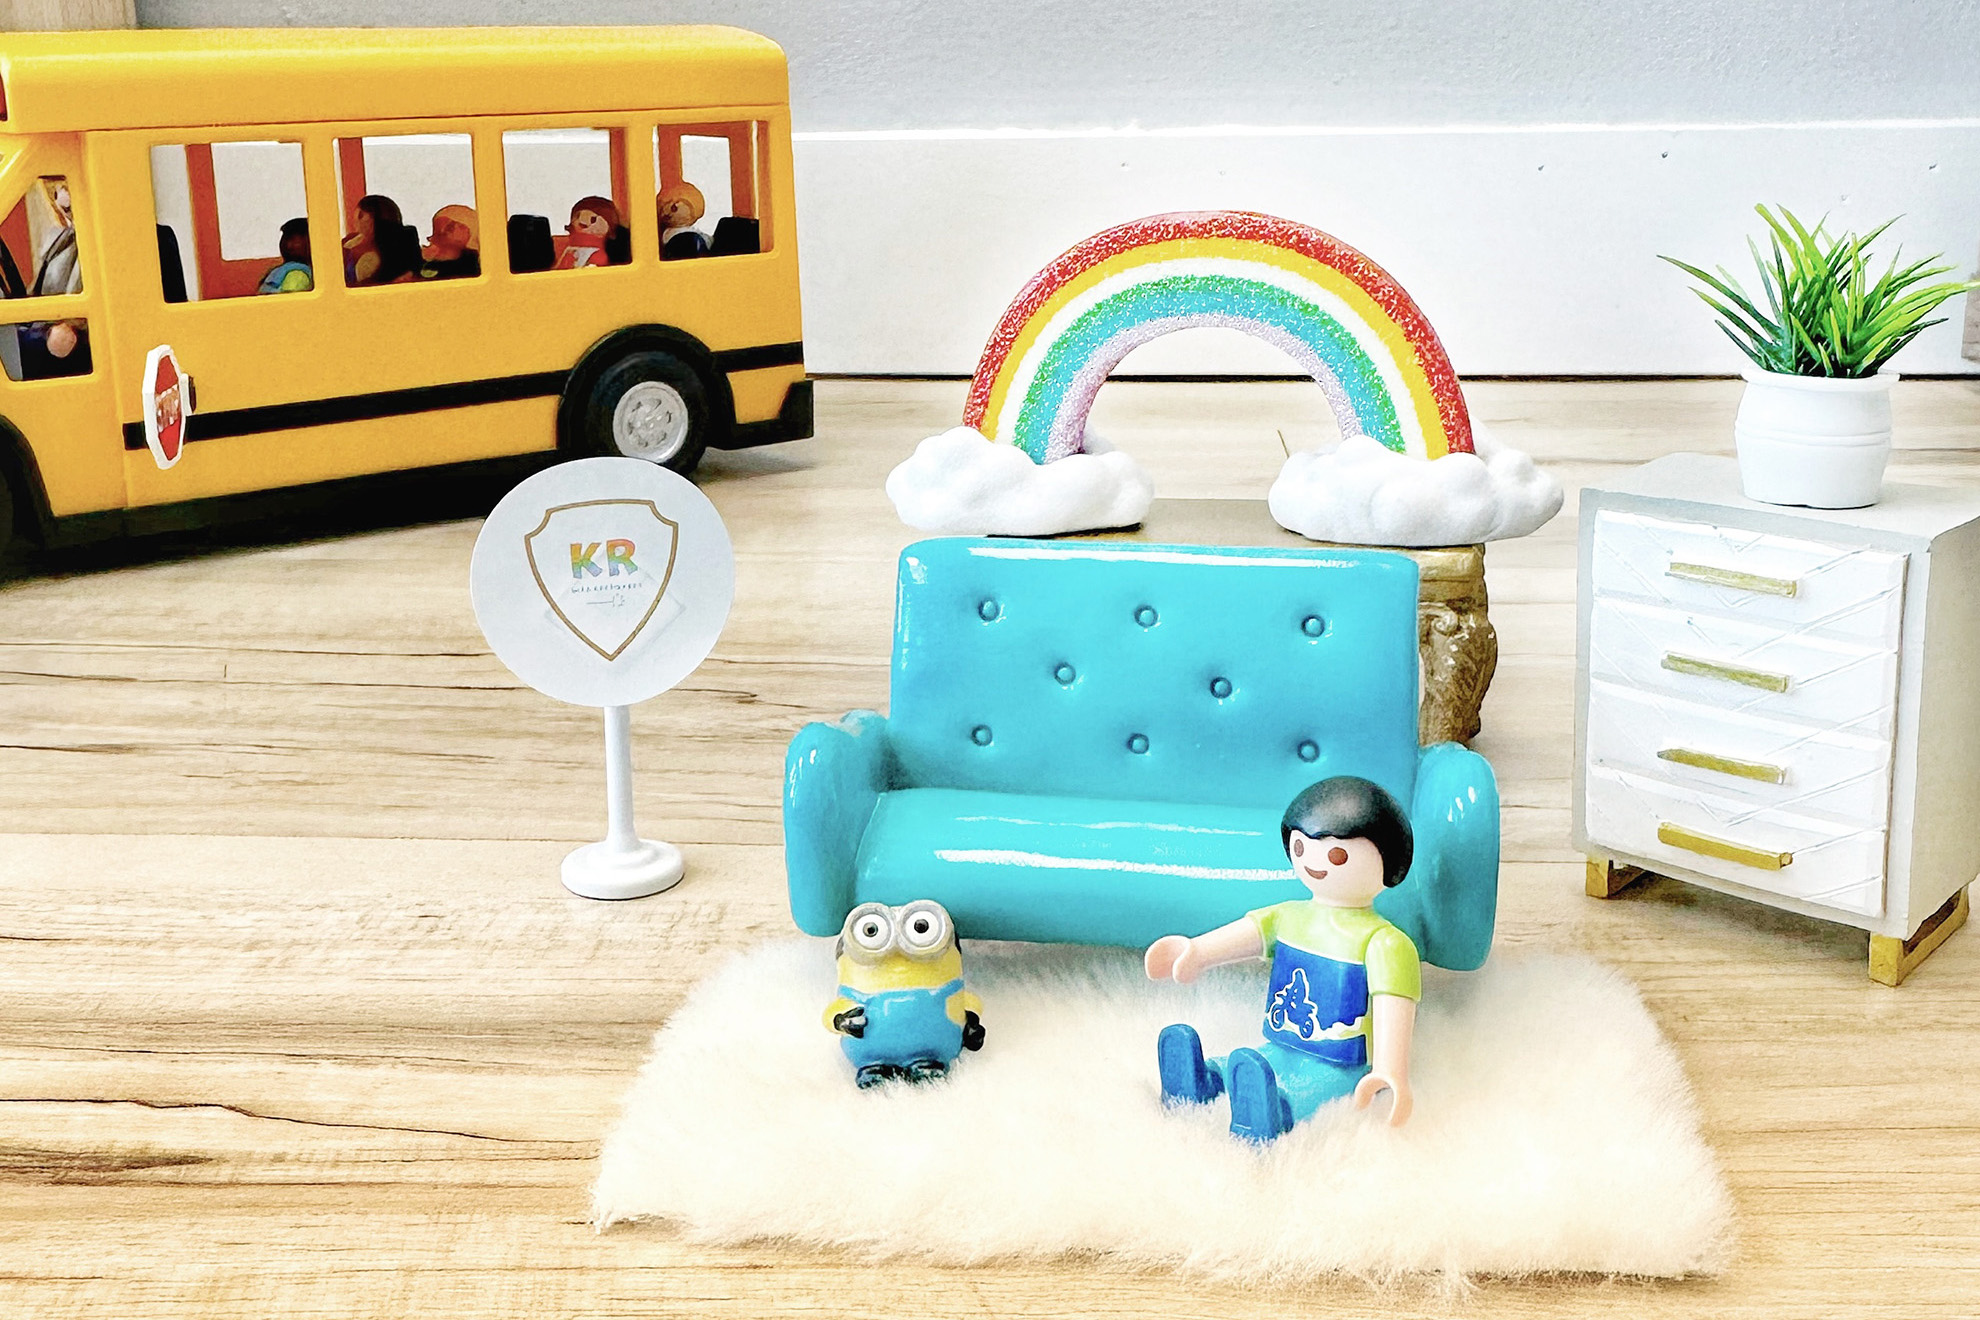 Toys arranged to depict a child in a Kids Reconnect play therapy room, with a toy school bus in the background.